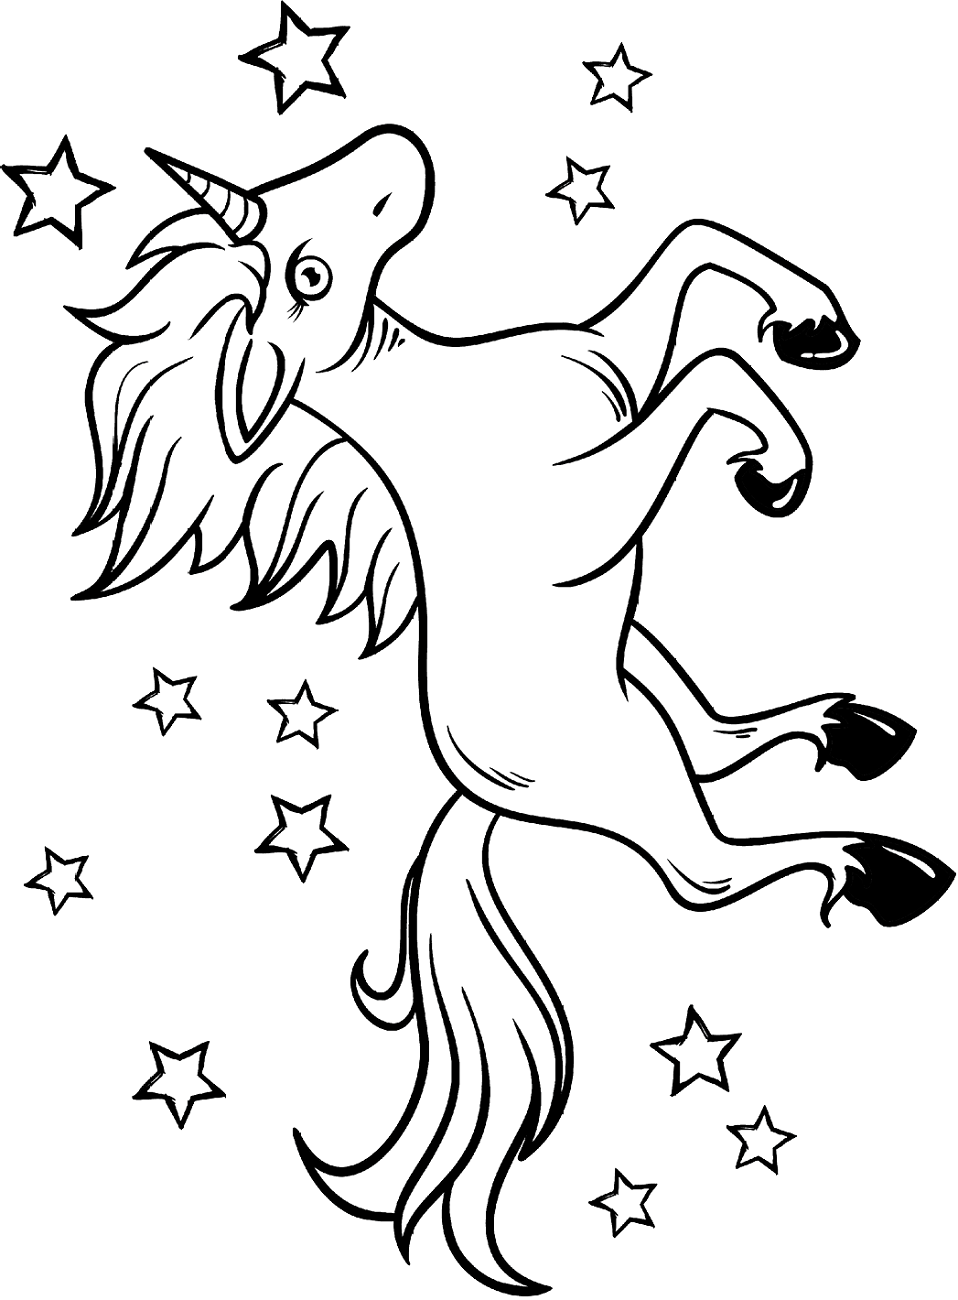 Karkadann In The Night Coloring Page   Free Printable Coloring ...